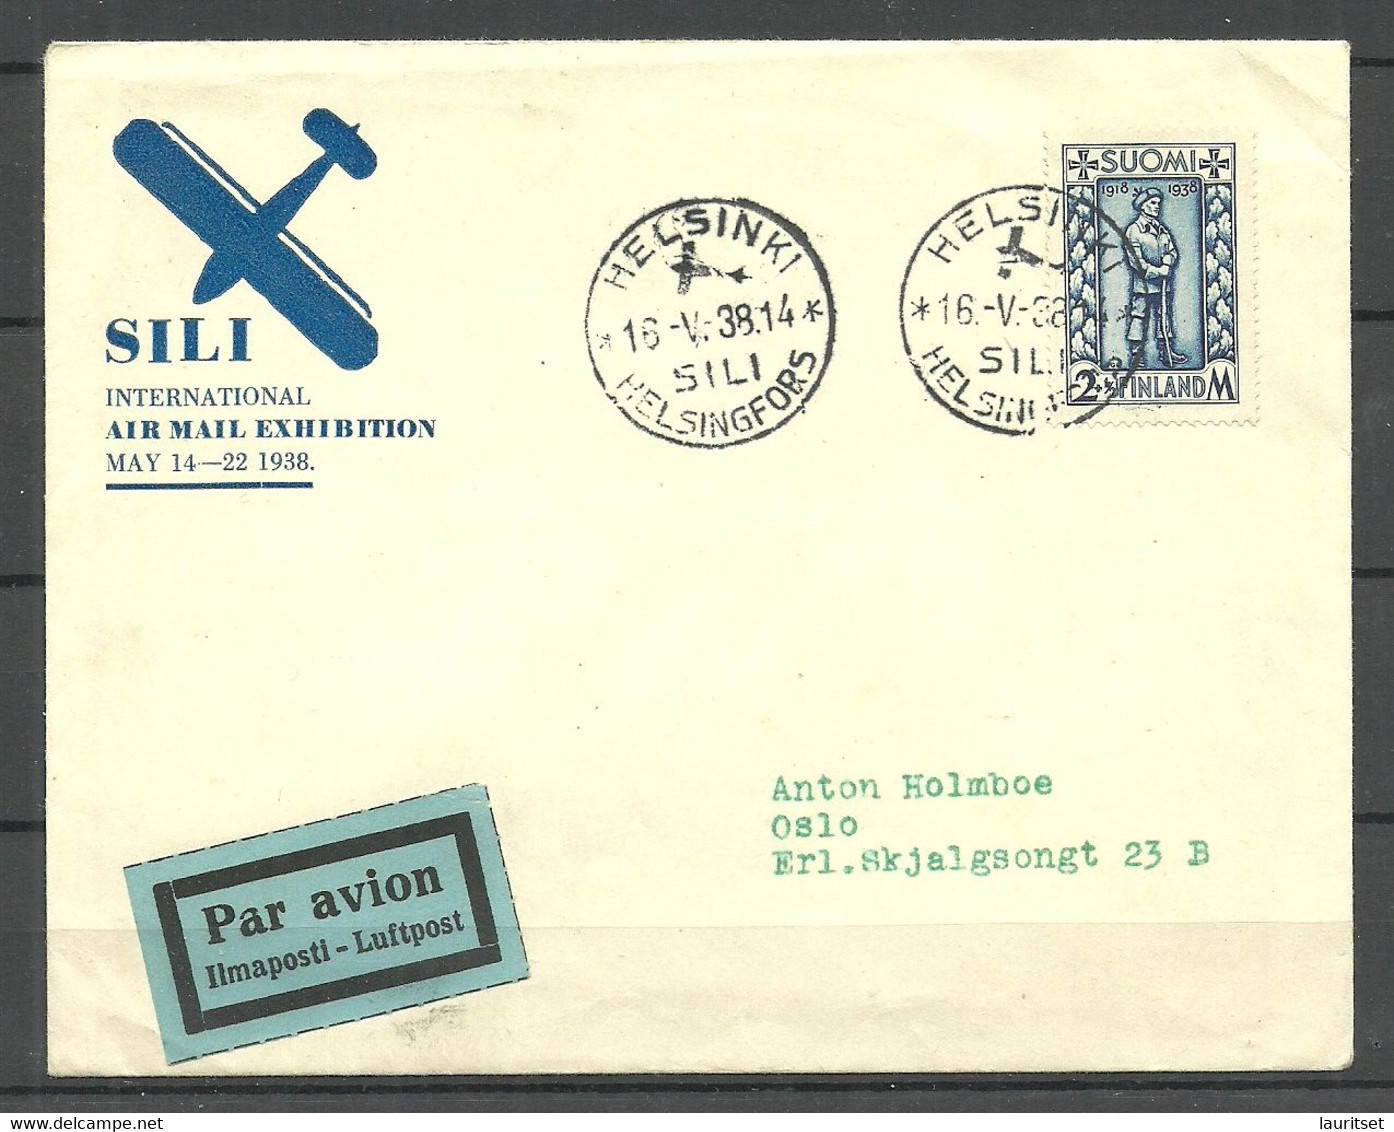 FINLAND 1939 Illustrated Cover SILI International Air Mail Exhibition Flugpost Air Plane Michel 211 As Single FDC? - Lettres & Documents